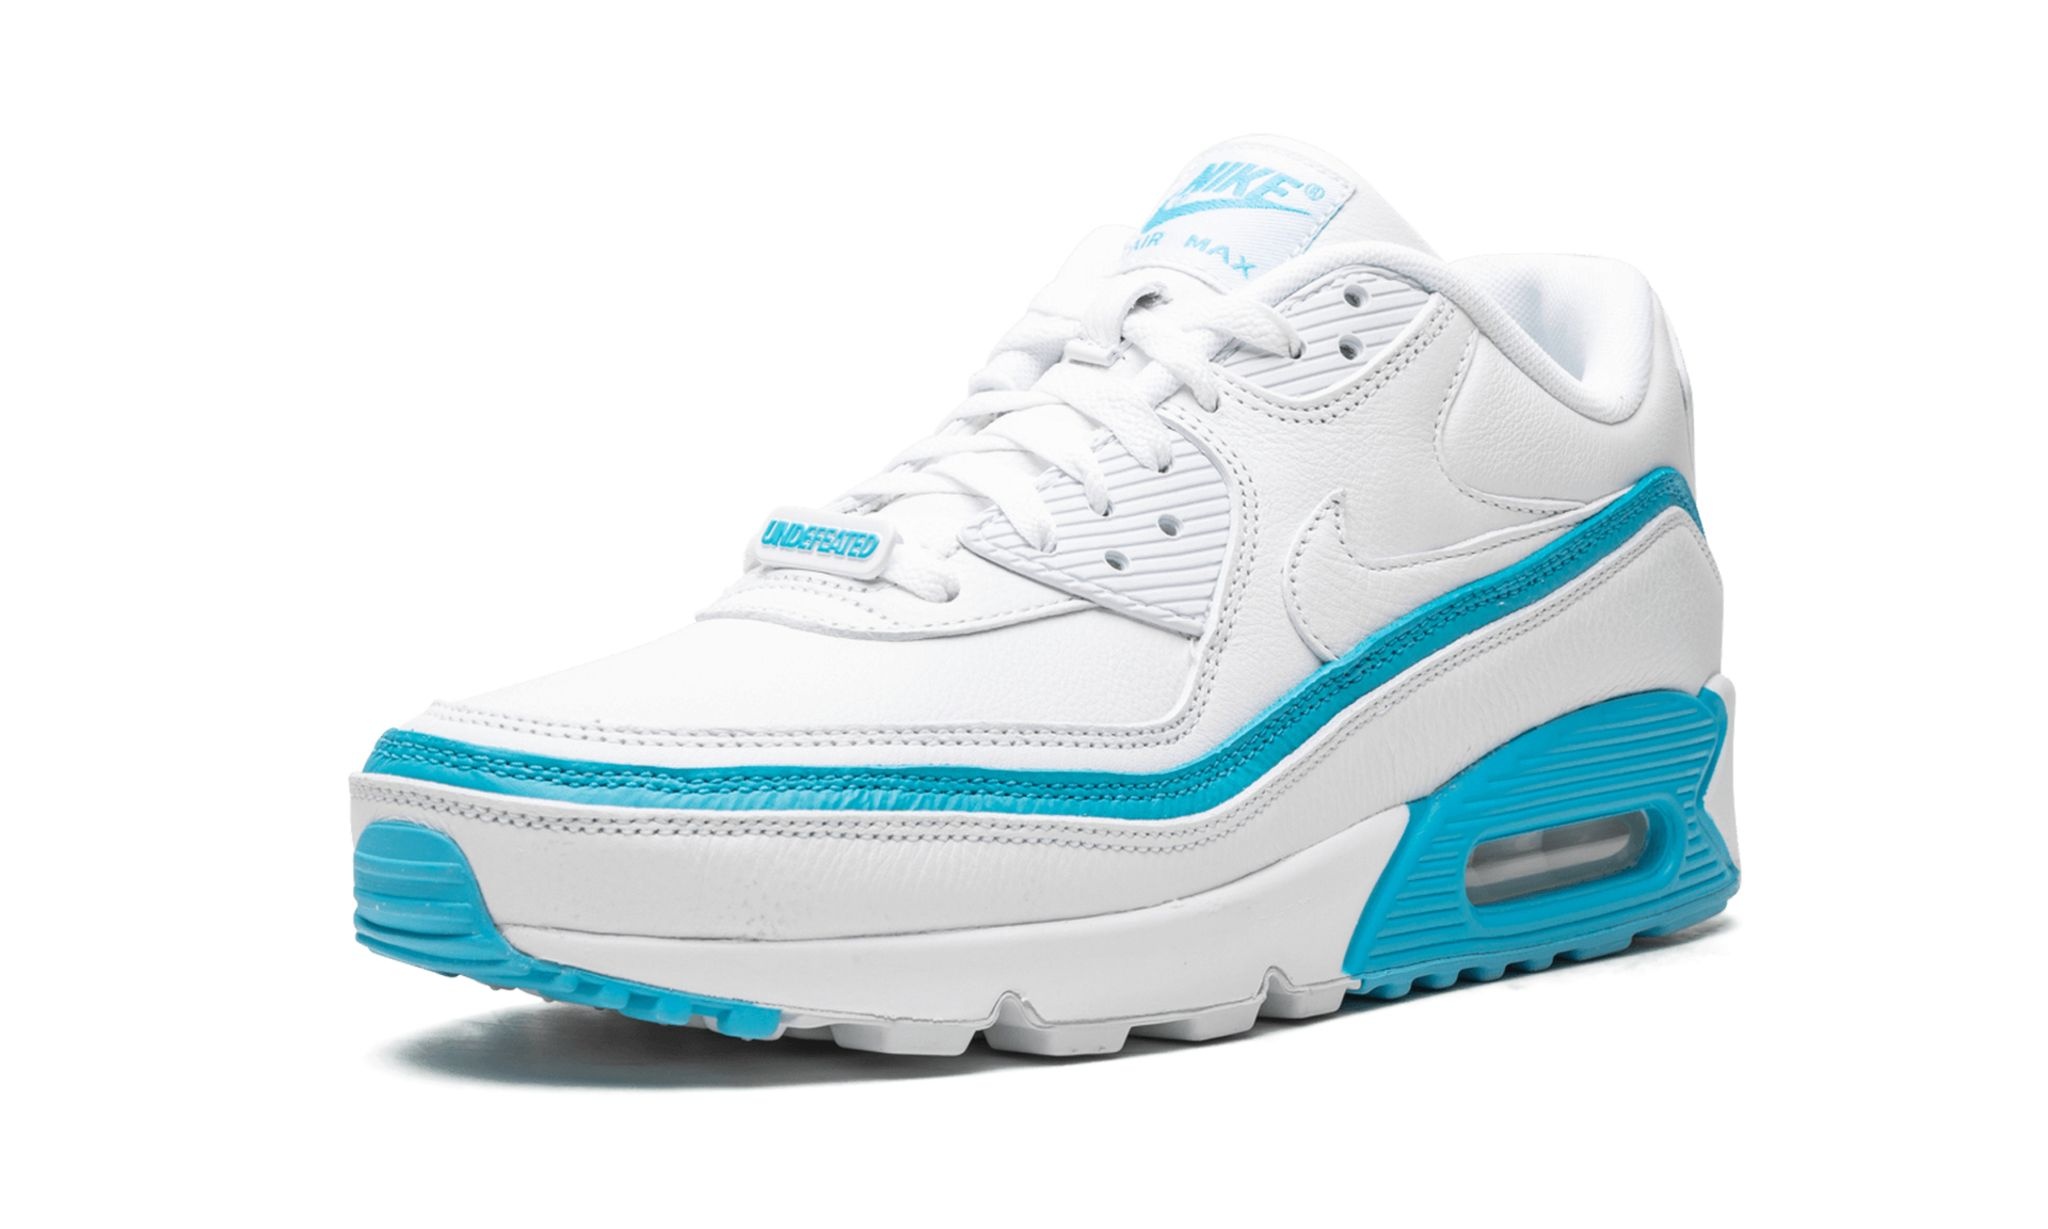 Air Max 90 / UNDFTD "Undefeated - White/Blue Fury" - 4